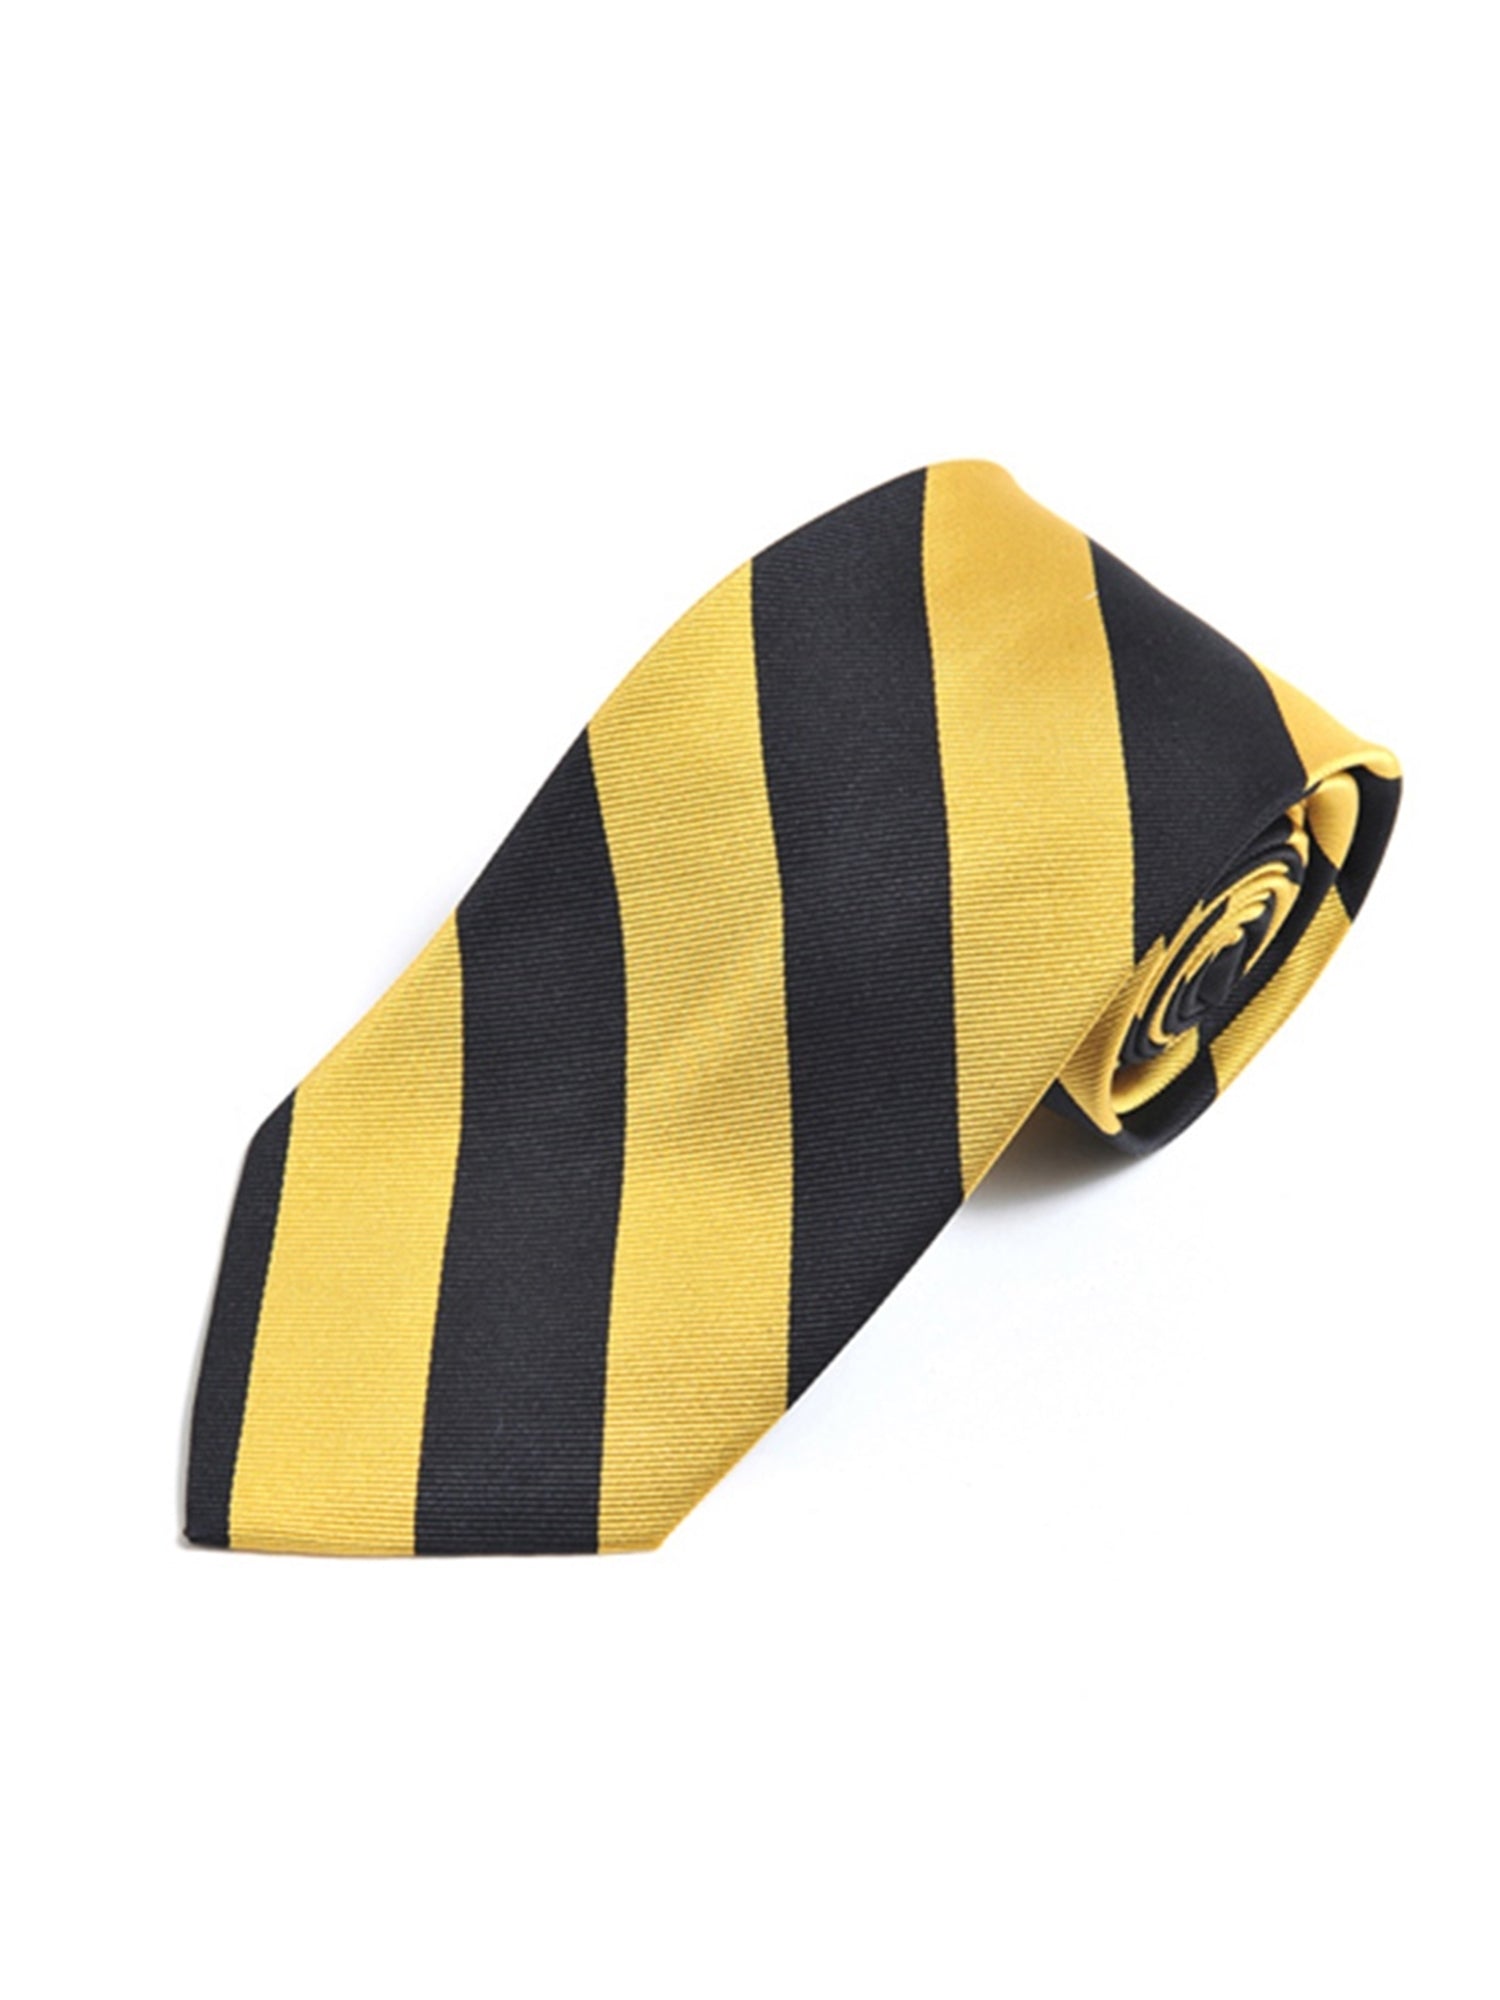 Men's College Striped Colored Silk Long Or X-Long Neck Tie Neck Tie TheDapperTie Black & Gold 57" long & 3.25" wide 